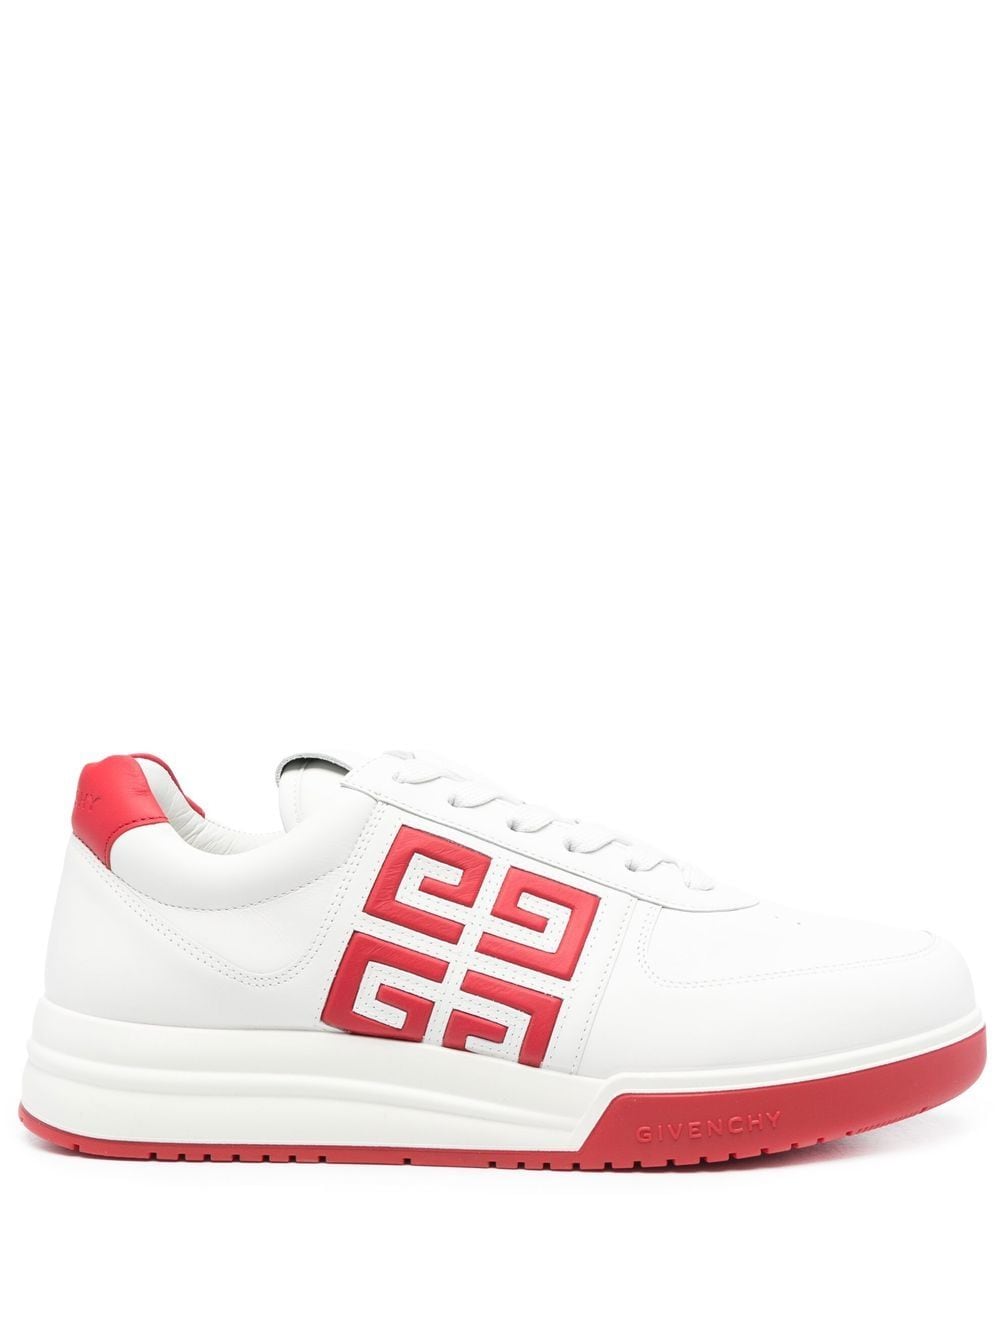 Sneakers basse 4G rosse/bianche